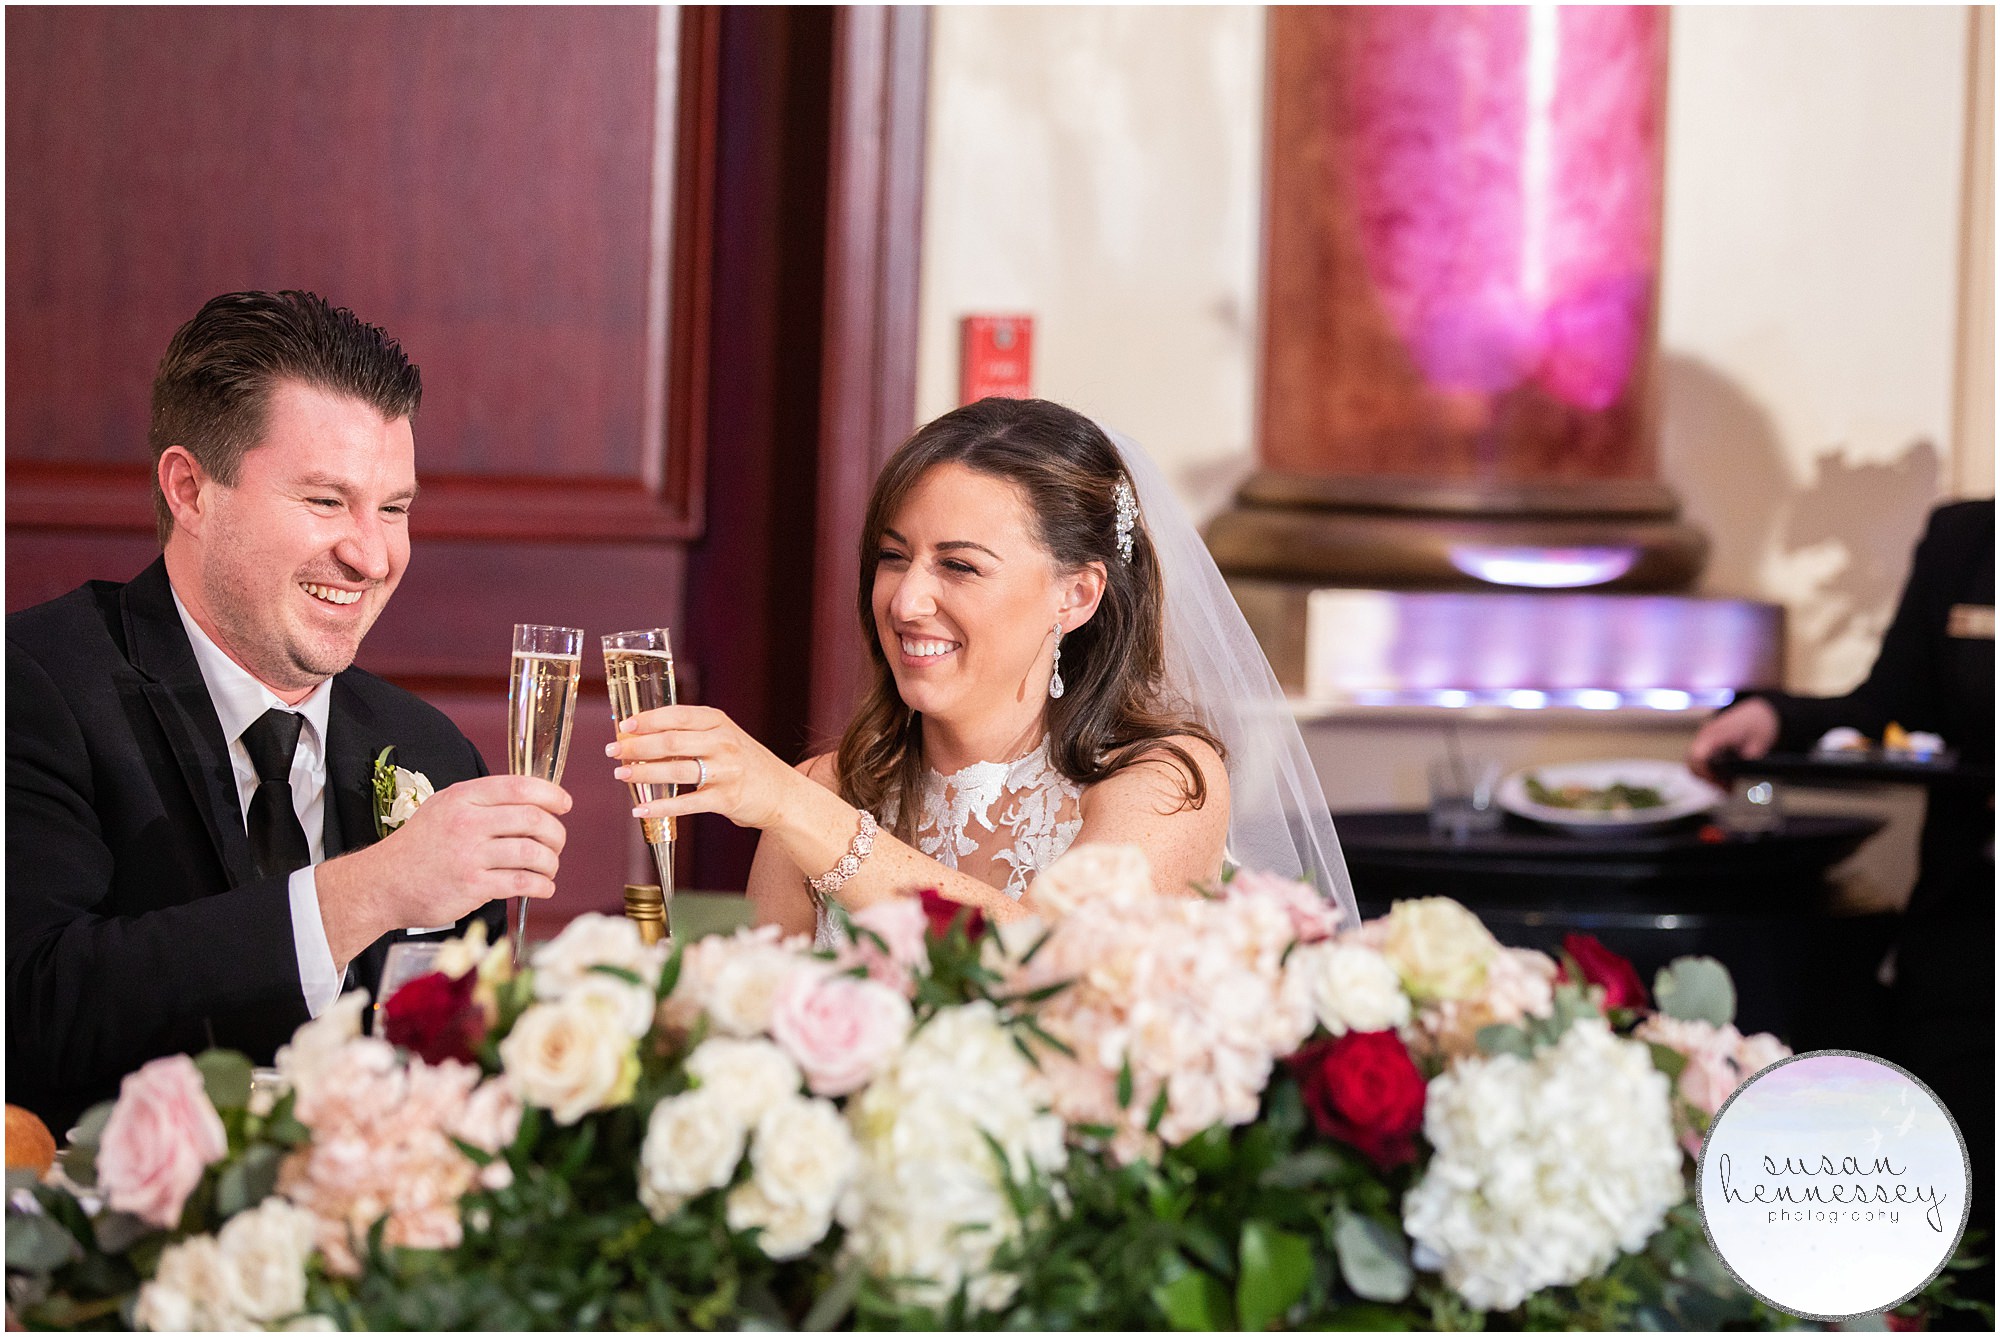 Susan Hennessey Photography Best of 2020 Weddings - The Merion in Cinnaminson reception